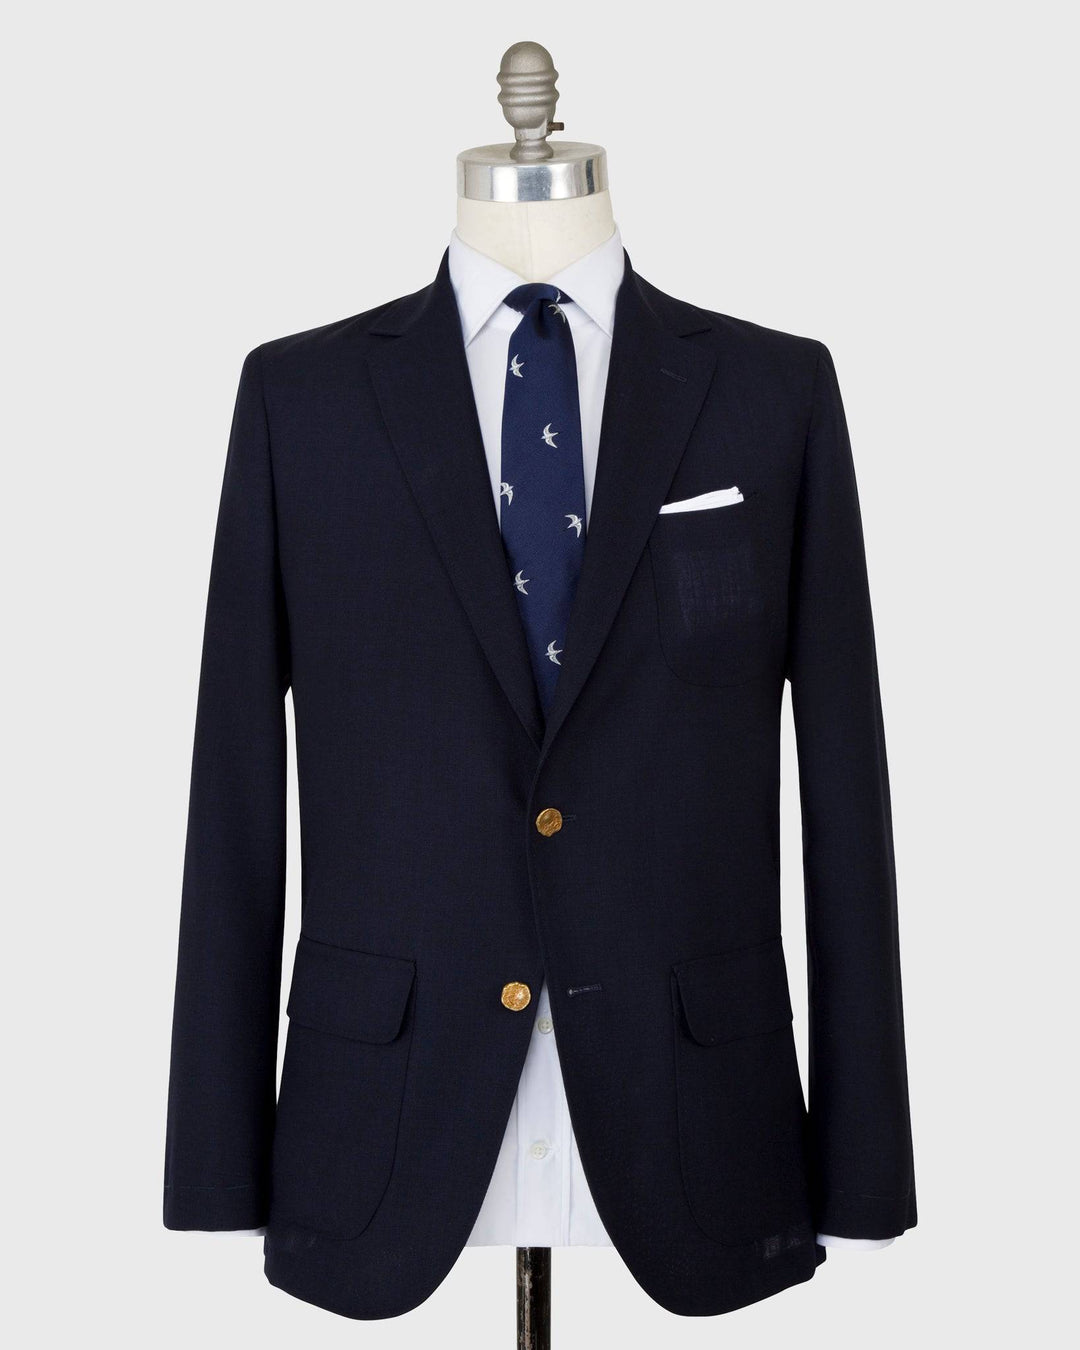 The Sid Mashburn Navy Ghost Blazer on a mannequin with white shirt and navy tie.